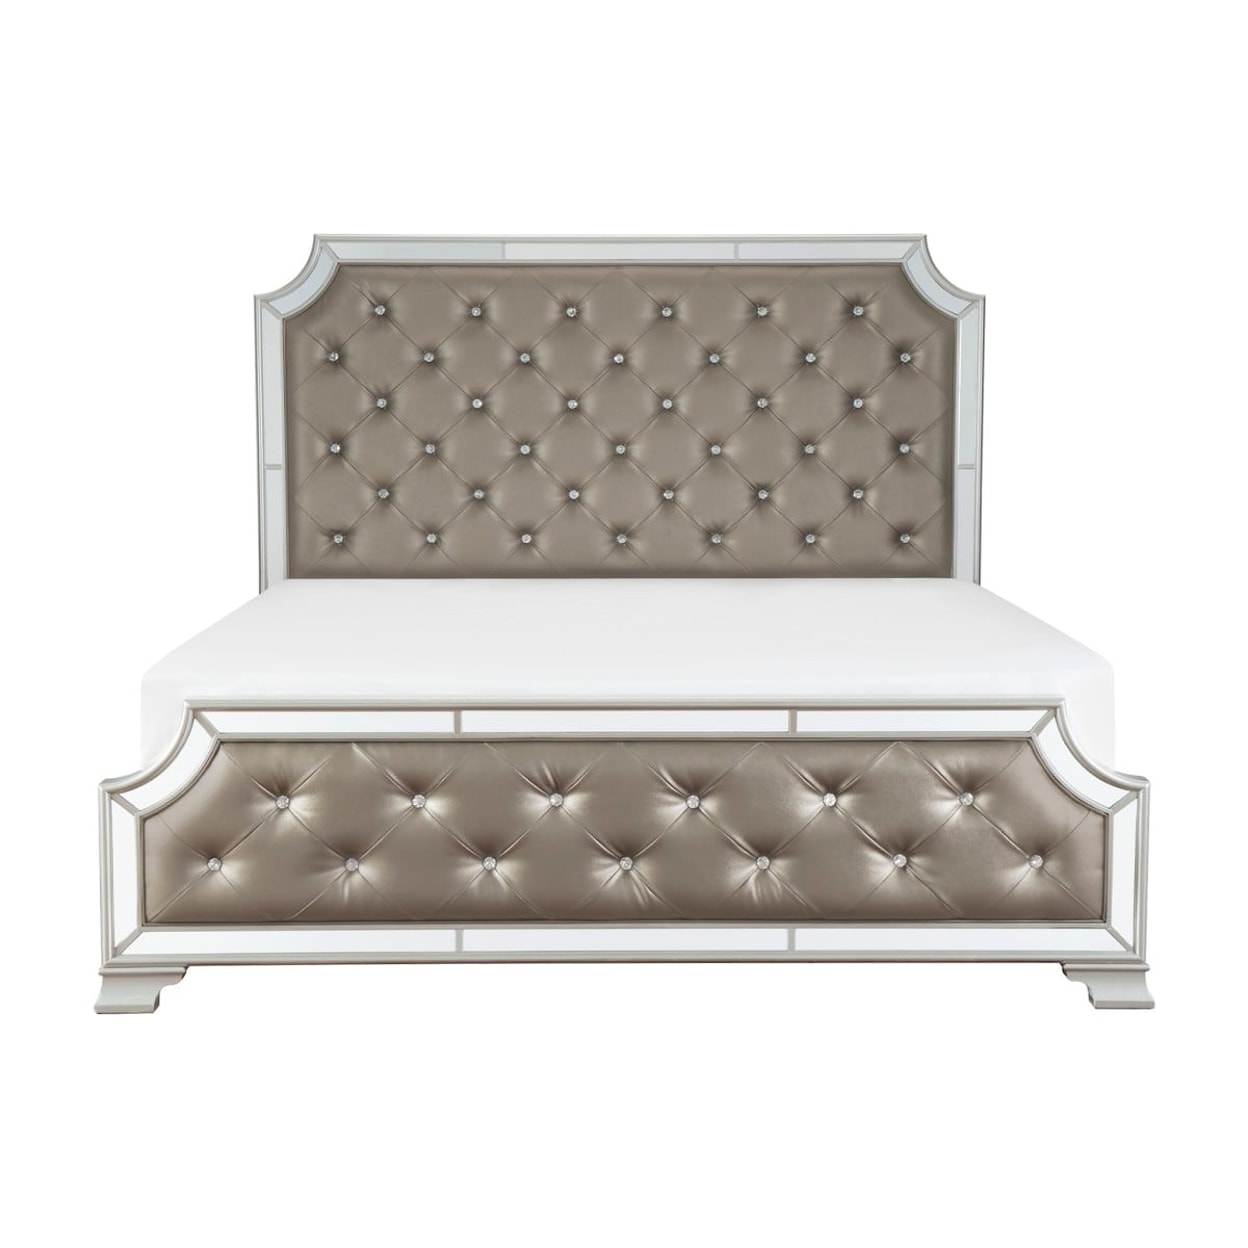 Homelegance Avondale King Upholstered Bed with Button Tufting